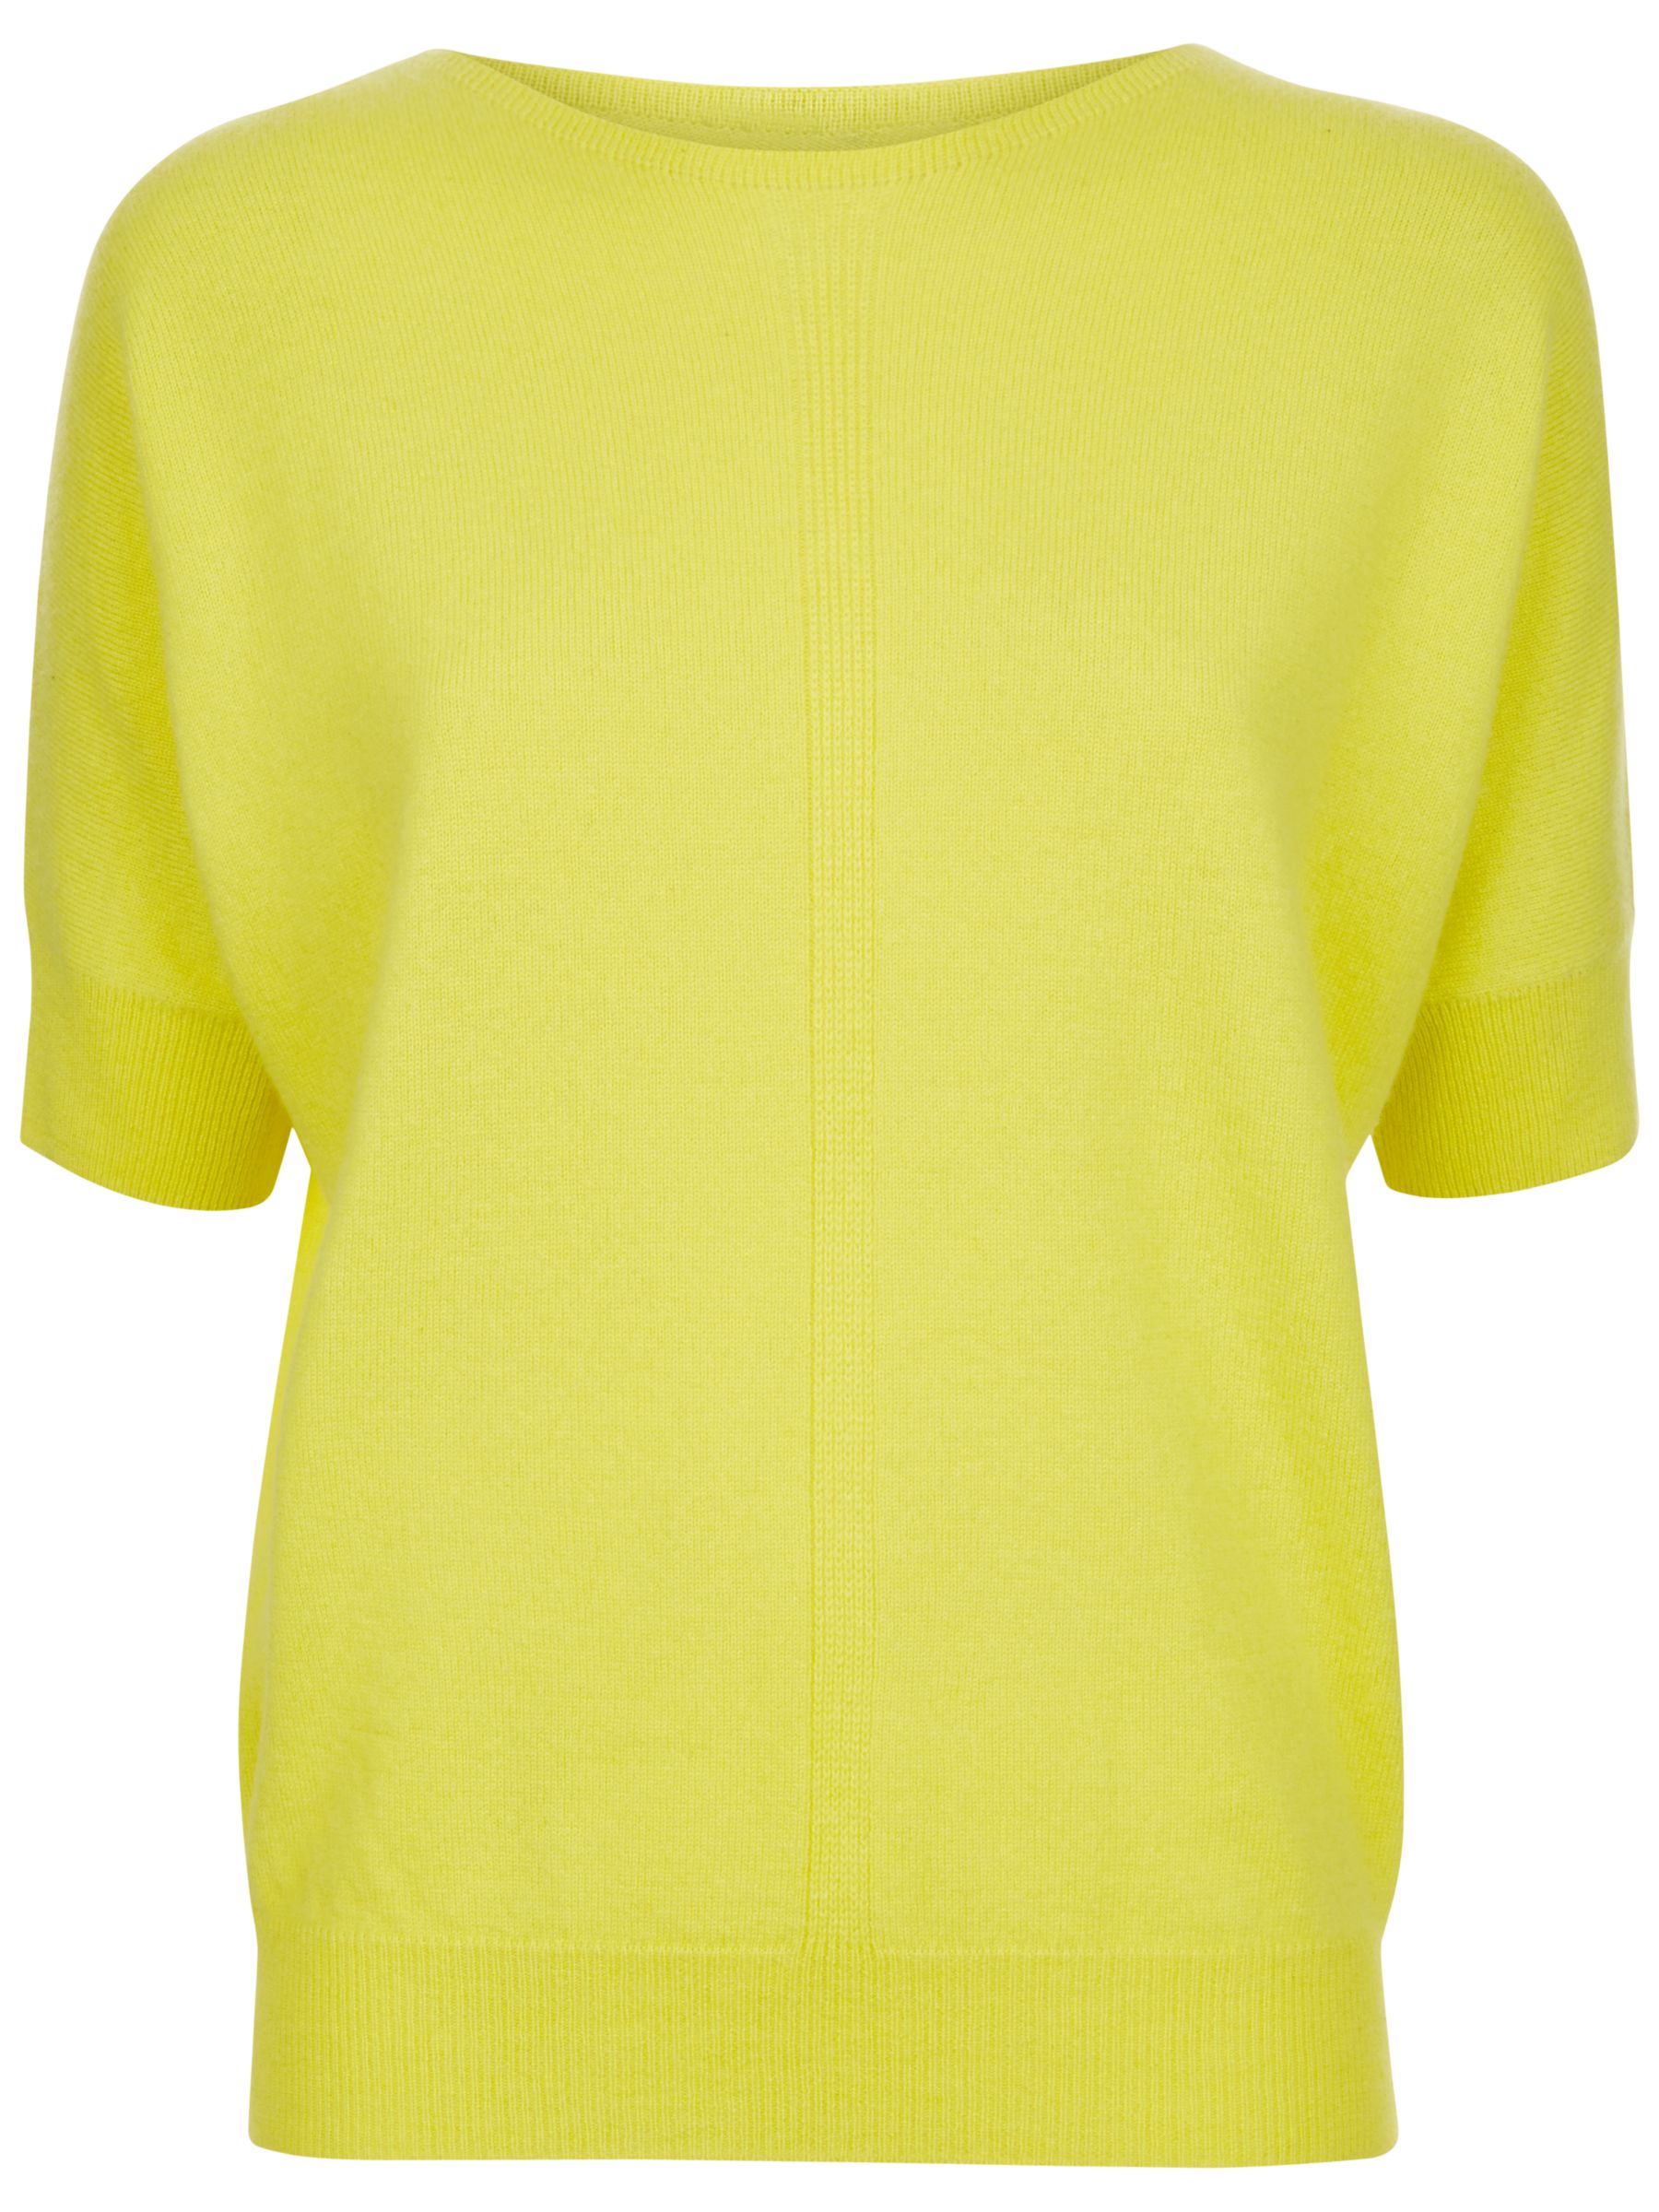 Jaeger Cashmere Slouchy Top